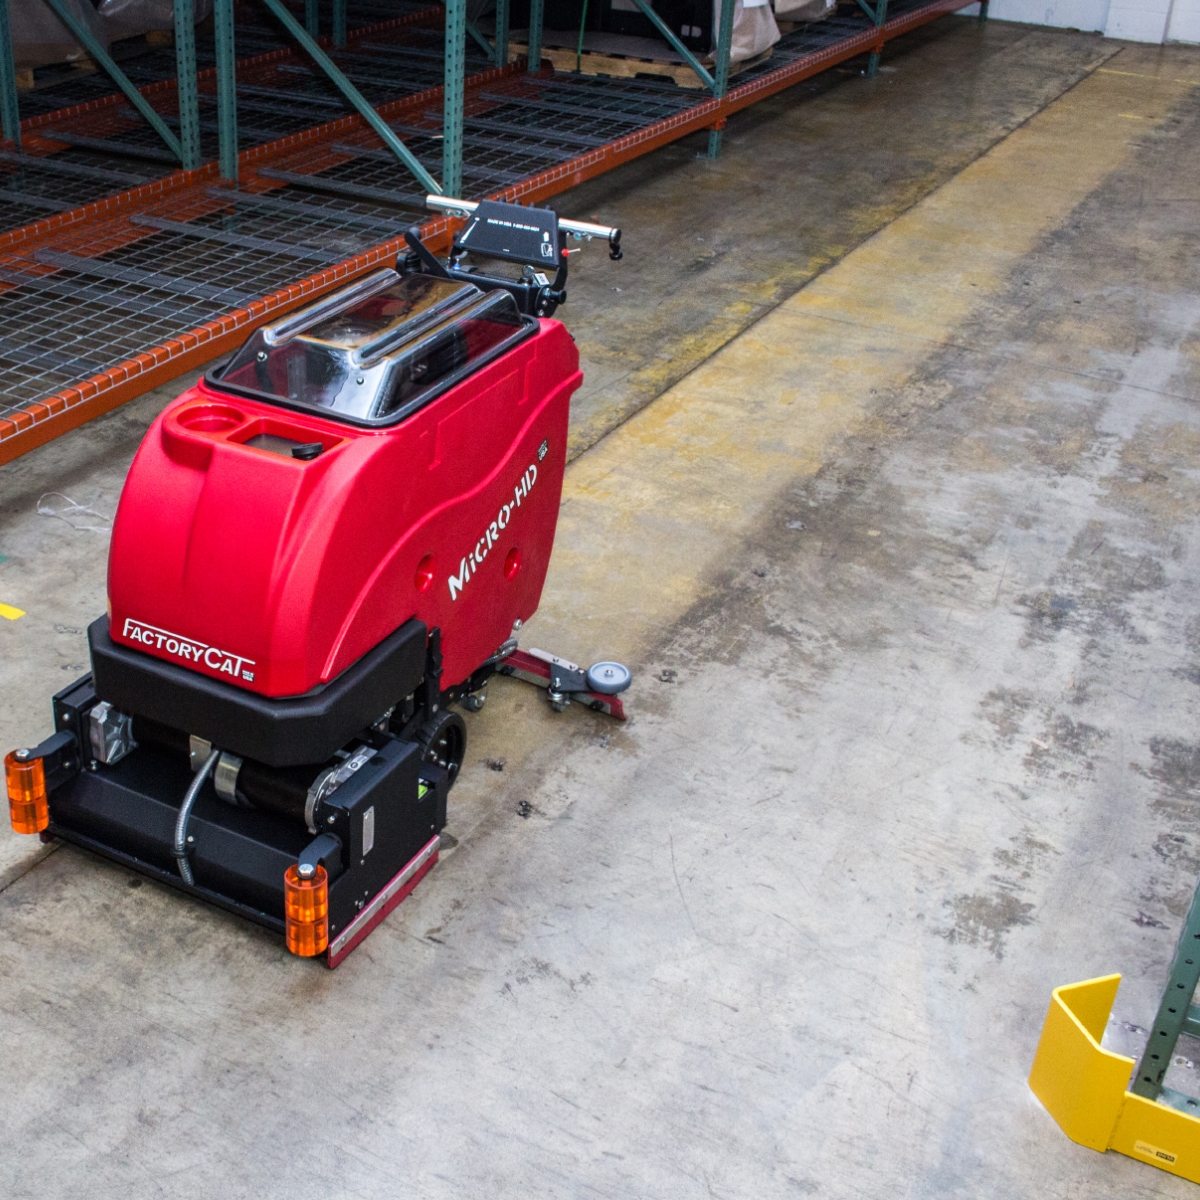 Micro-HD floor scrubber making a clean pathway in a heavy industrial area